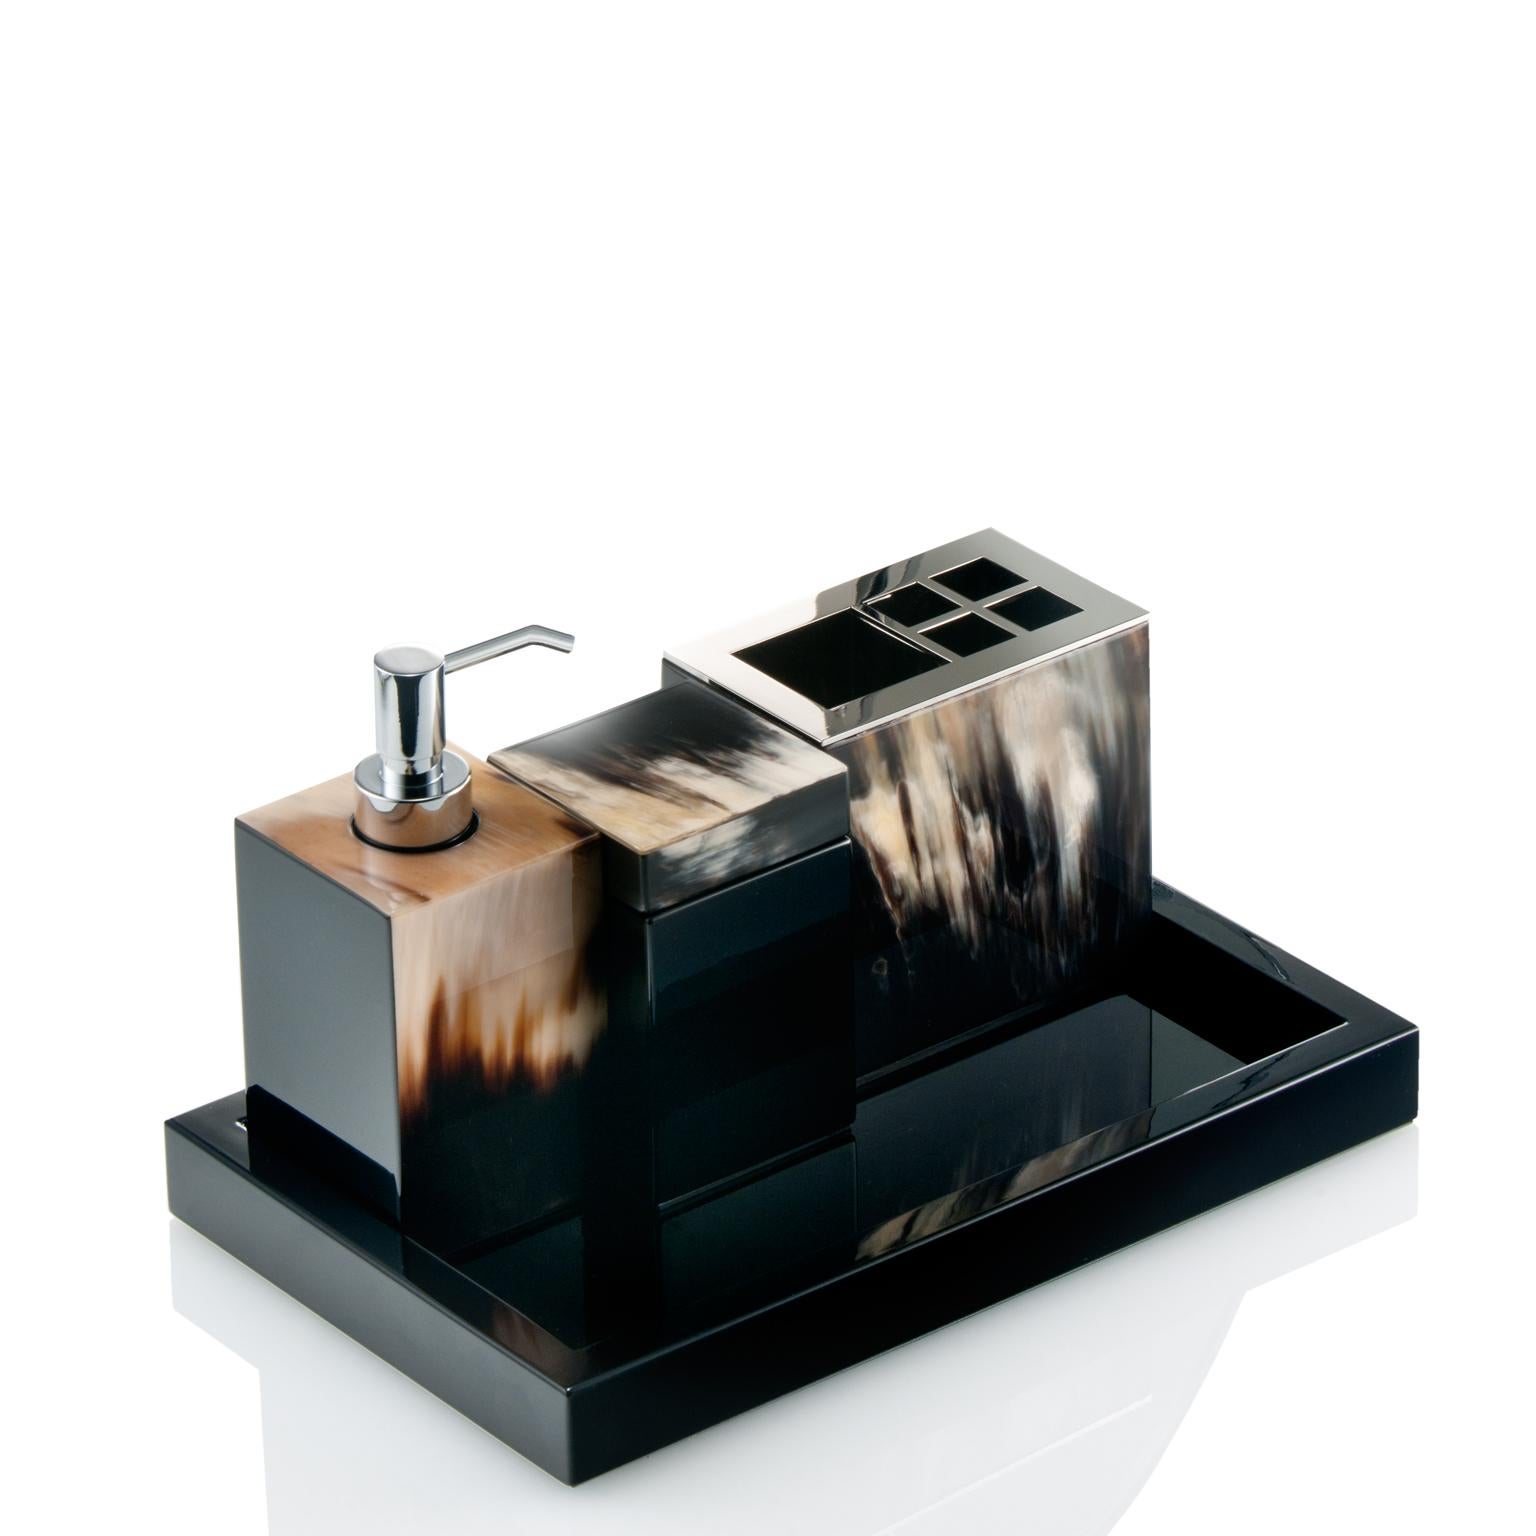 Complete your bathroom decor with this striking Iris soap dispenser. Finished in polished black lacquered wood, the design is given further character by the captivating natural shades of dark Corno Italiano inlays and by elegant details in chromed